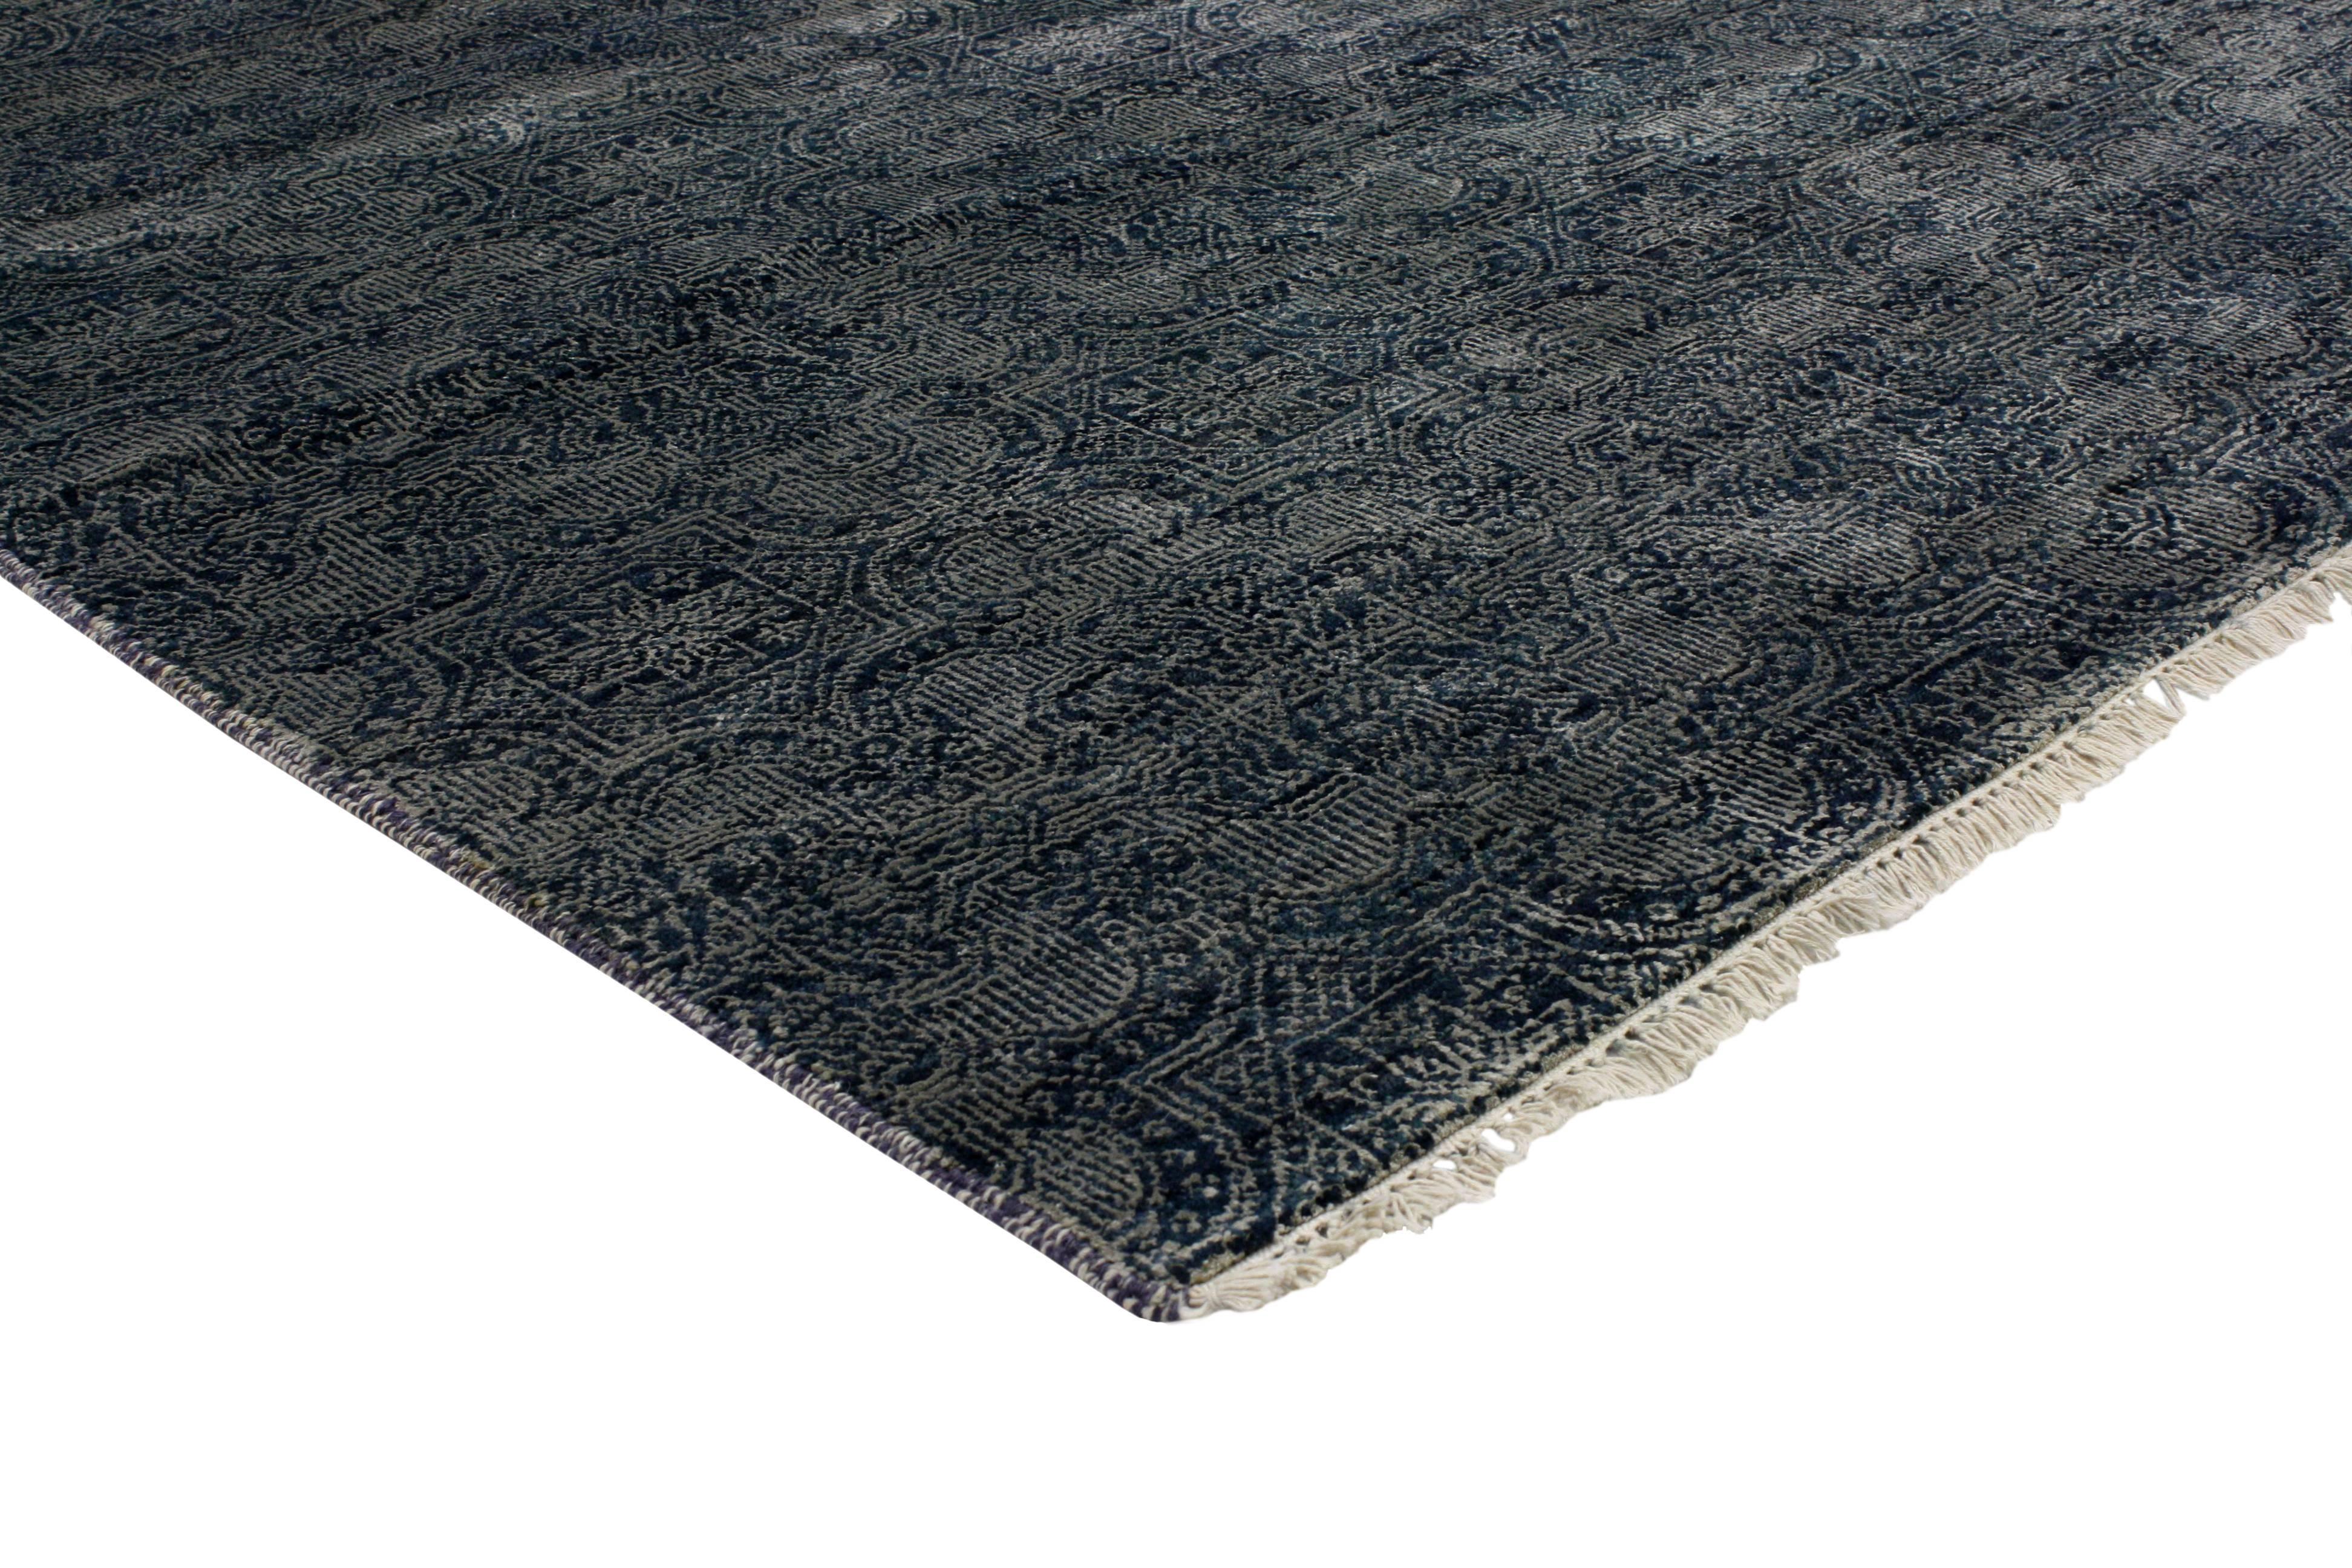 30284 New Transitional Modern Rug with Moorish Design Pattern, 04'06 X 07'00. Infuse your room with the curvaceous, exotic arabesque pattern highlighted in this transitional Moorish-style rug with modern design. Enhanced by its mesmerizing earth